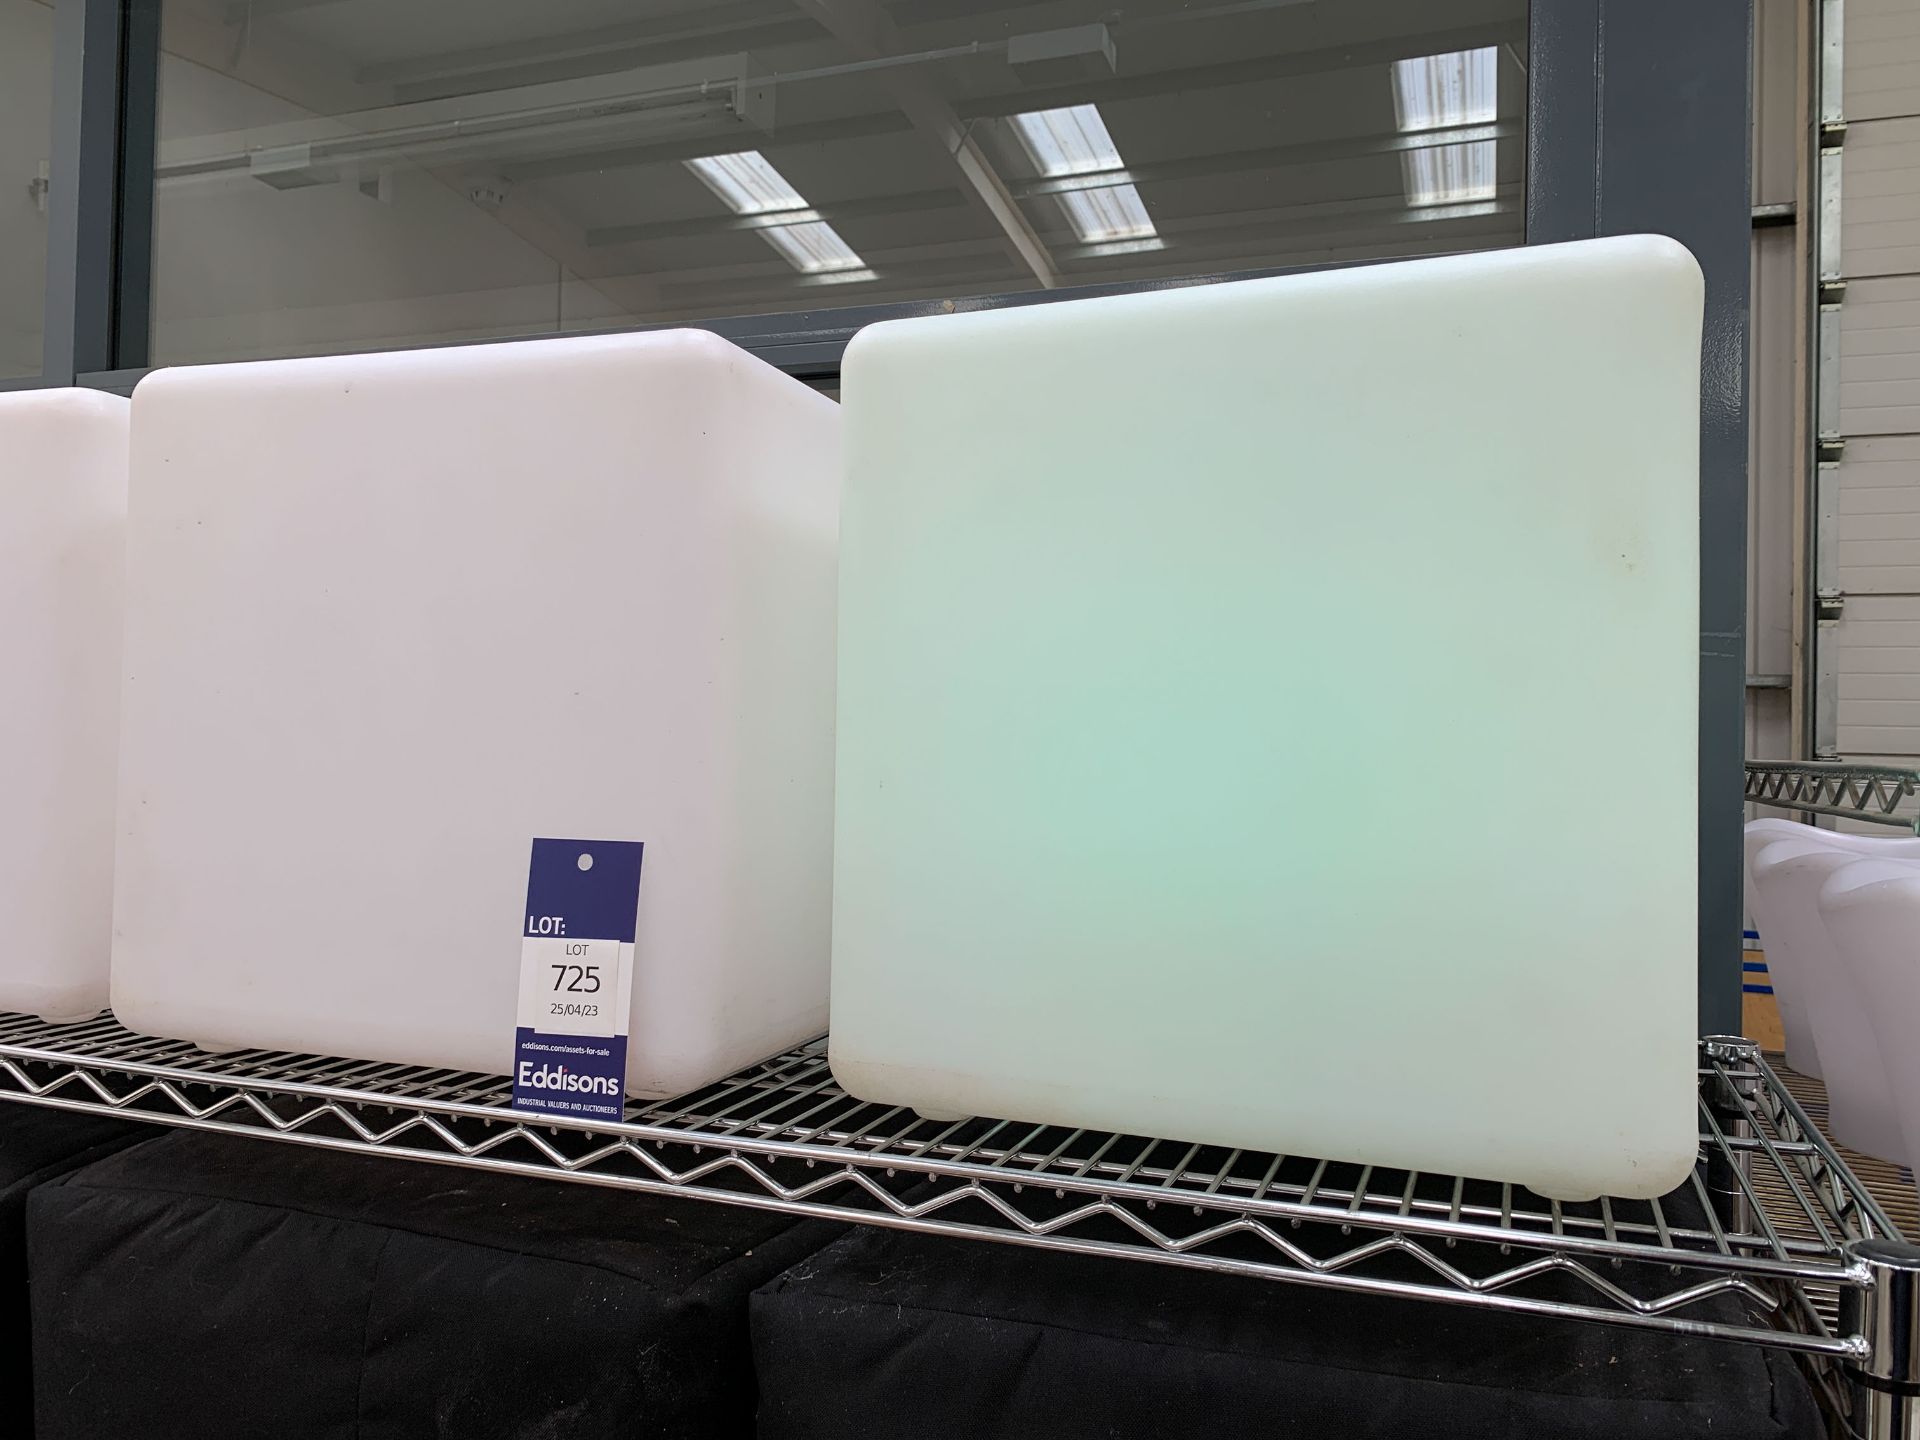 6x LED Lightup Cube Seats with Protective Cover - Image 2 of 2